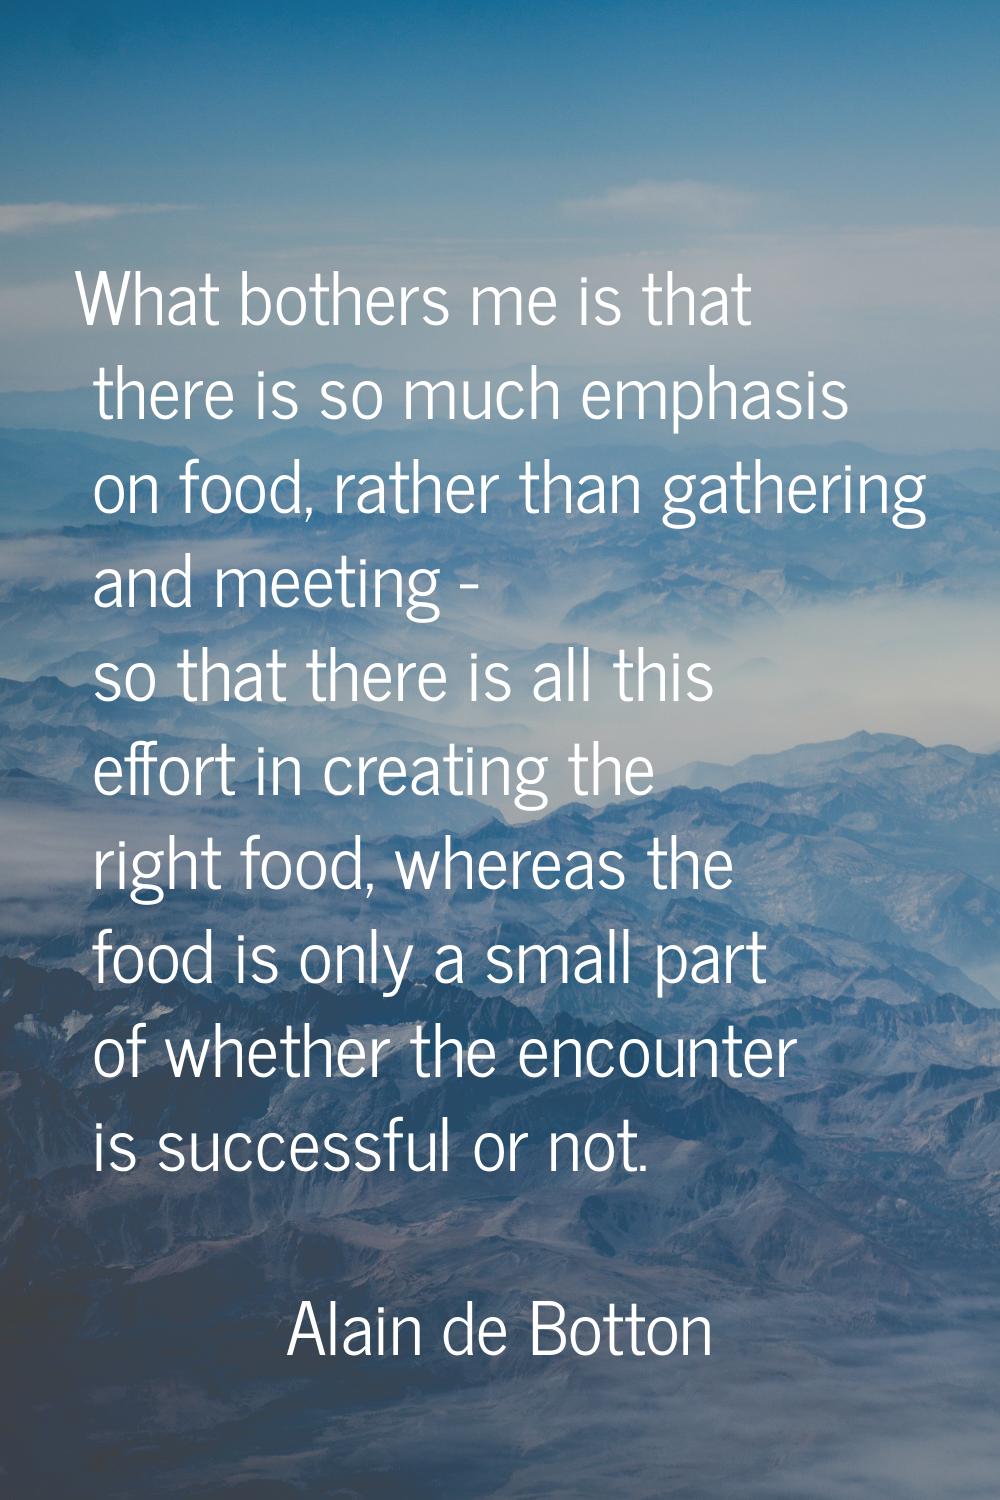 What bothers me is that there is so much emphasis on food, rather than gathering and meeting - so t